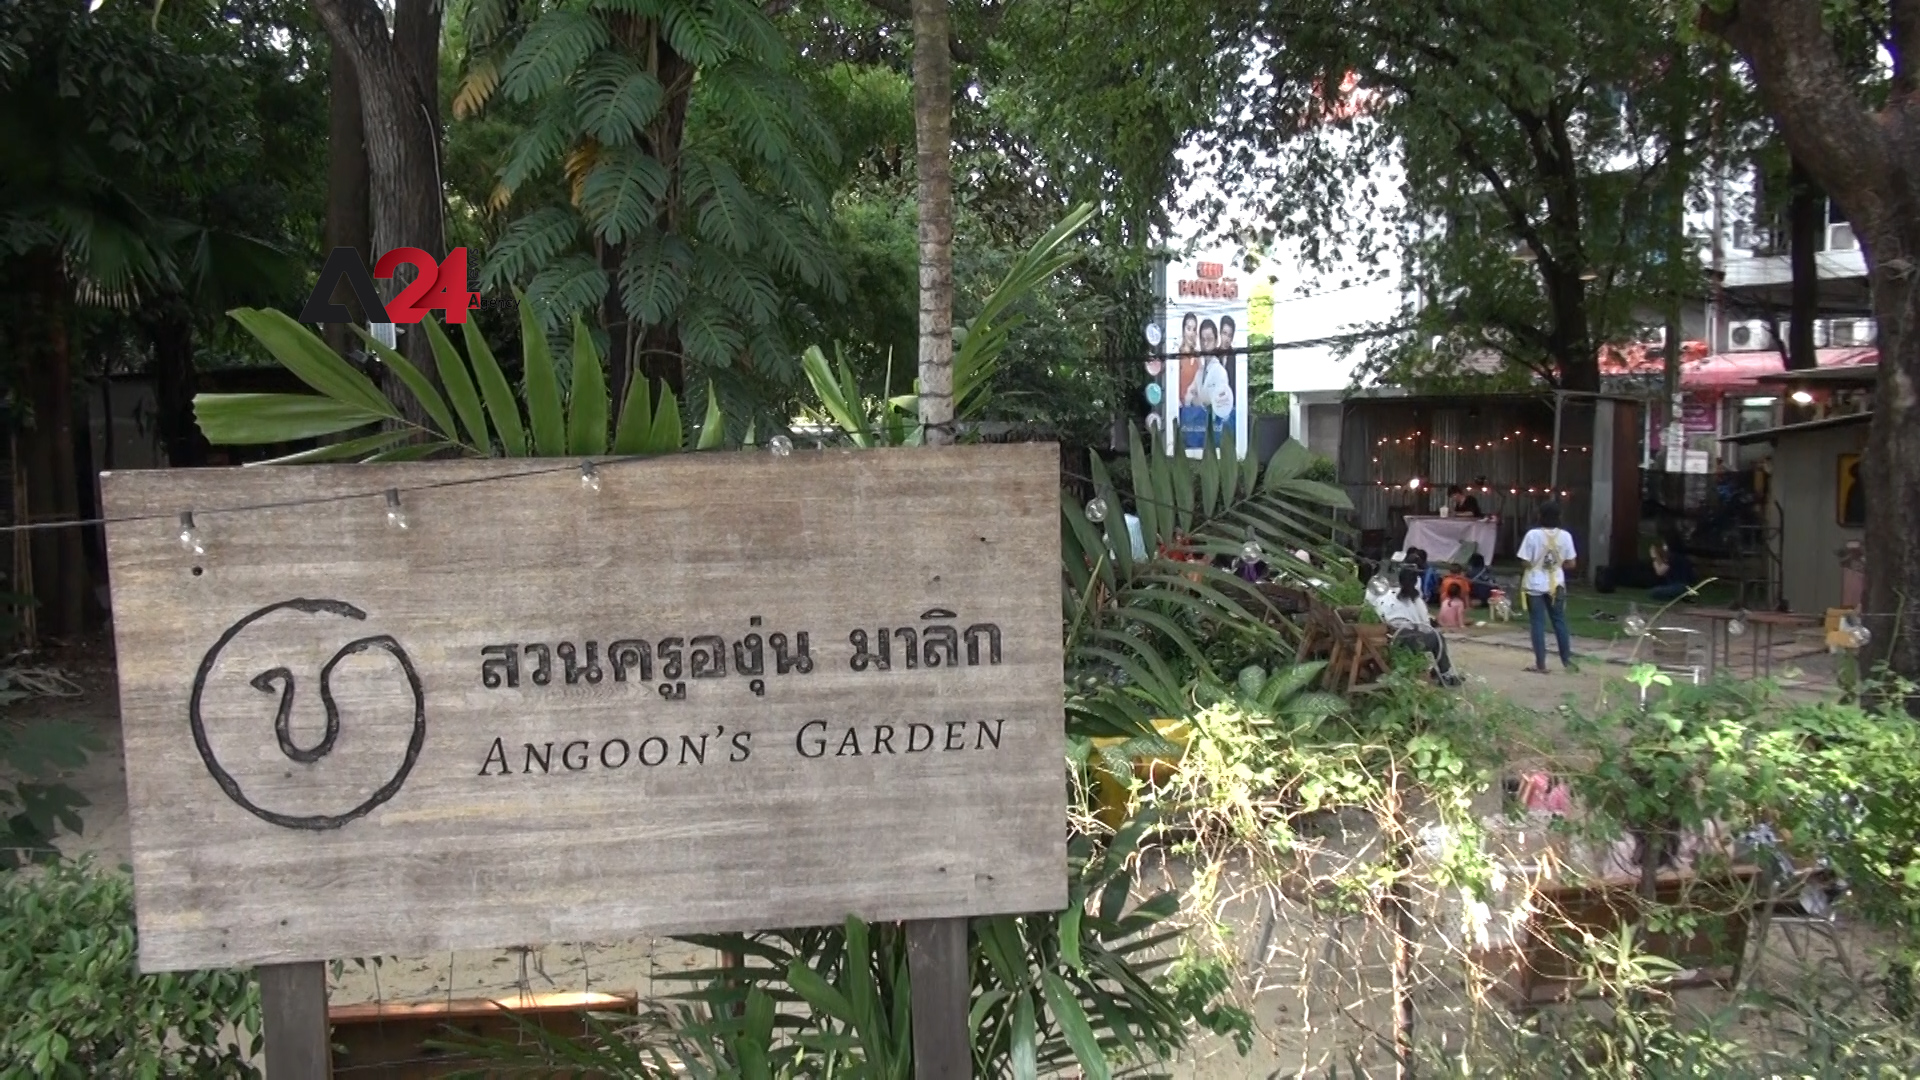 Thailand – Angoon Garden, an initiative to assist and entertain the needy children